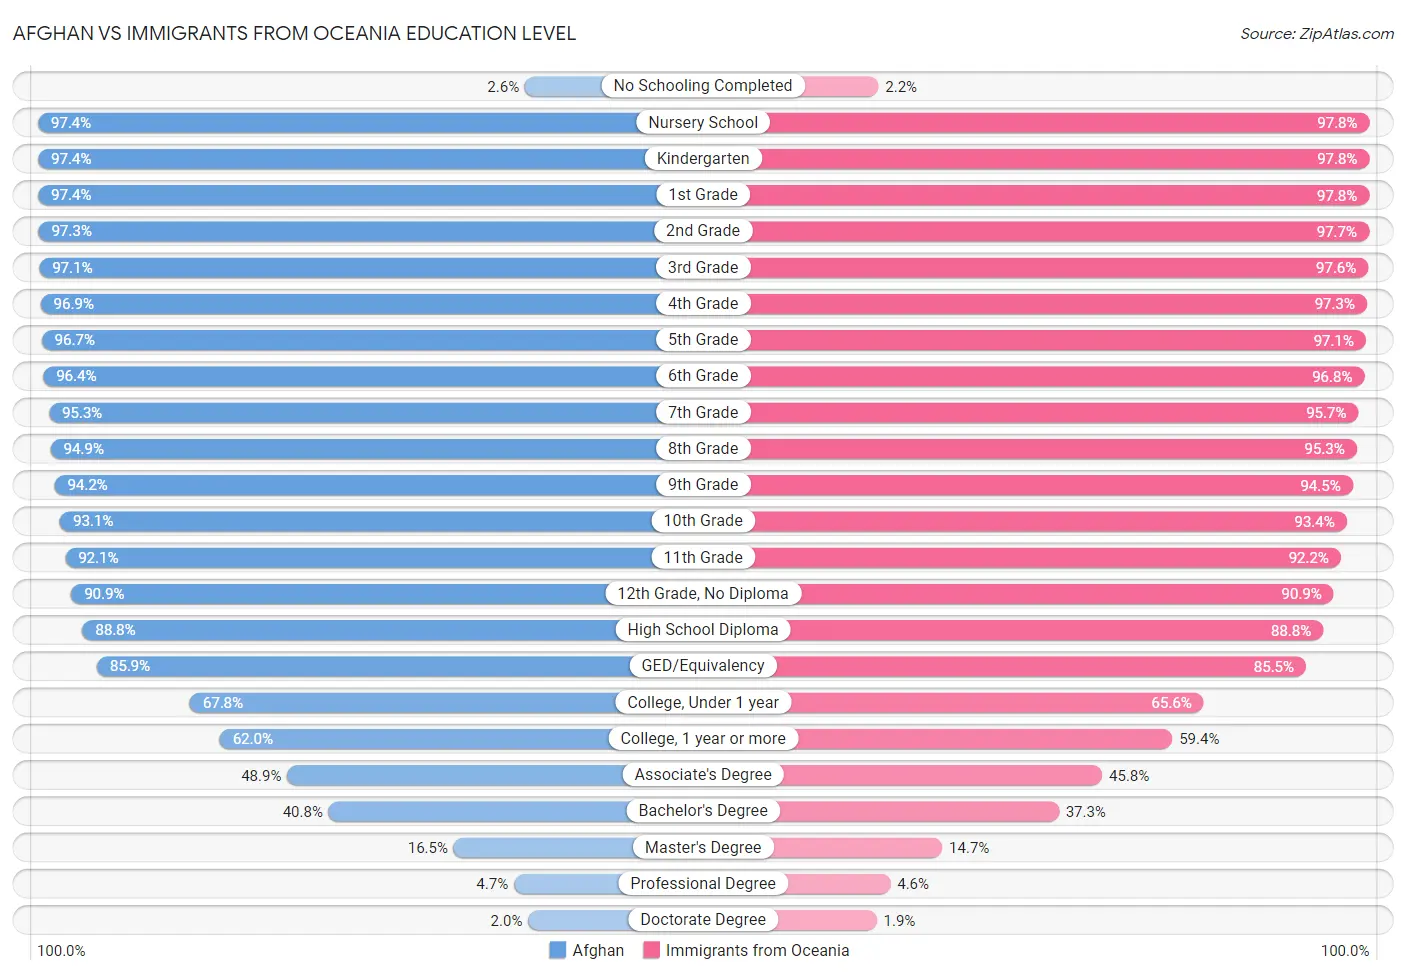 Afghan vs Immigrants from Oceania Education Level